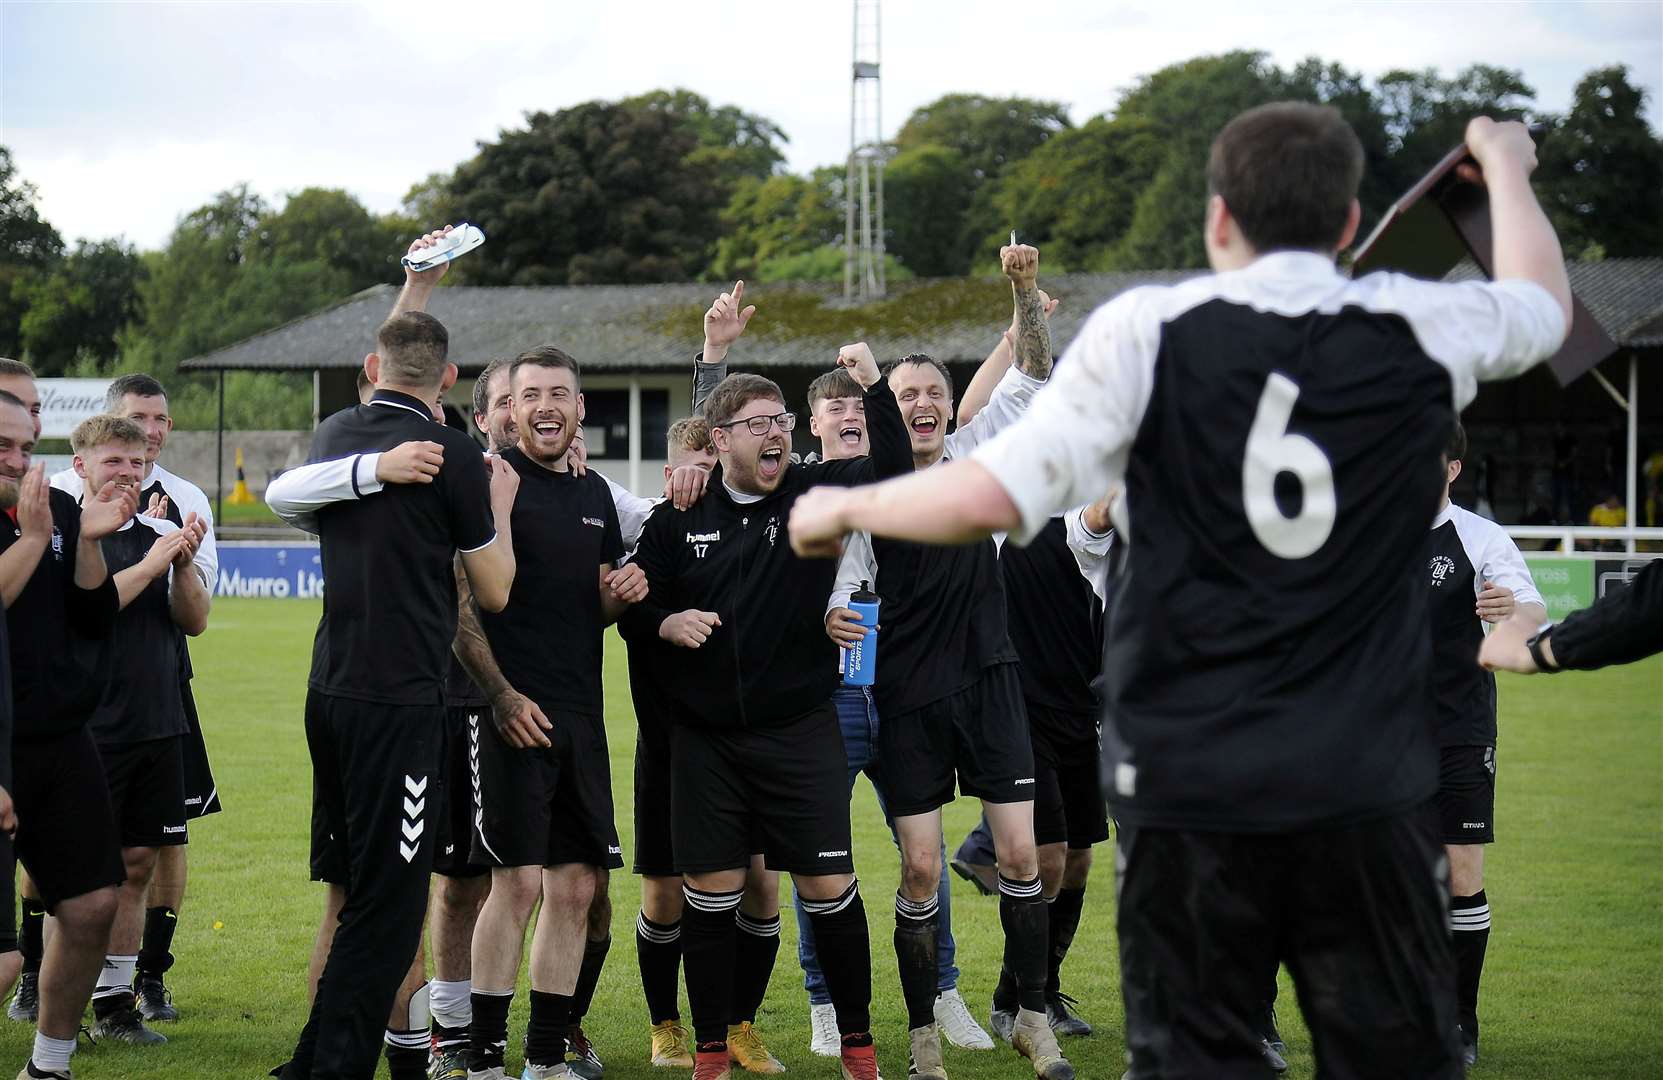 Buckie United were declared champions after a 3-0 win over Hopeman in the welfare league title play-off match at Borough Briggs, Elgin. Picture: Becky Saunderson.